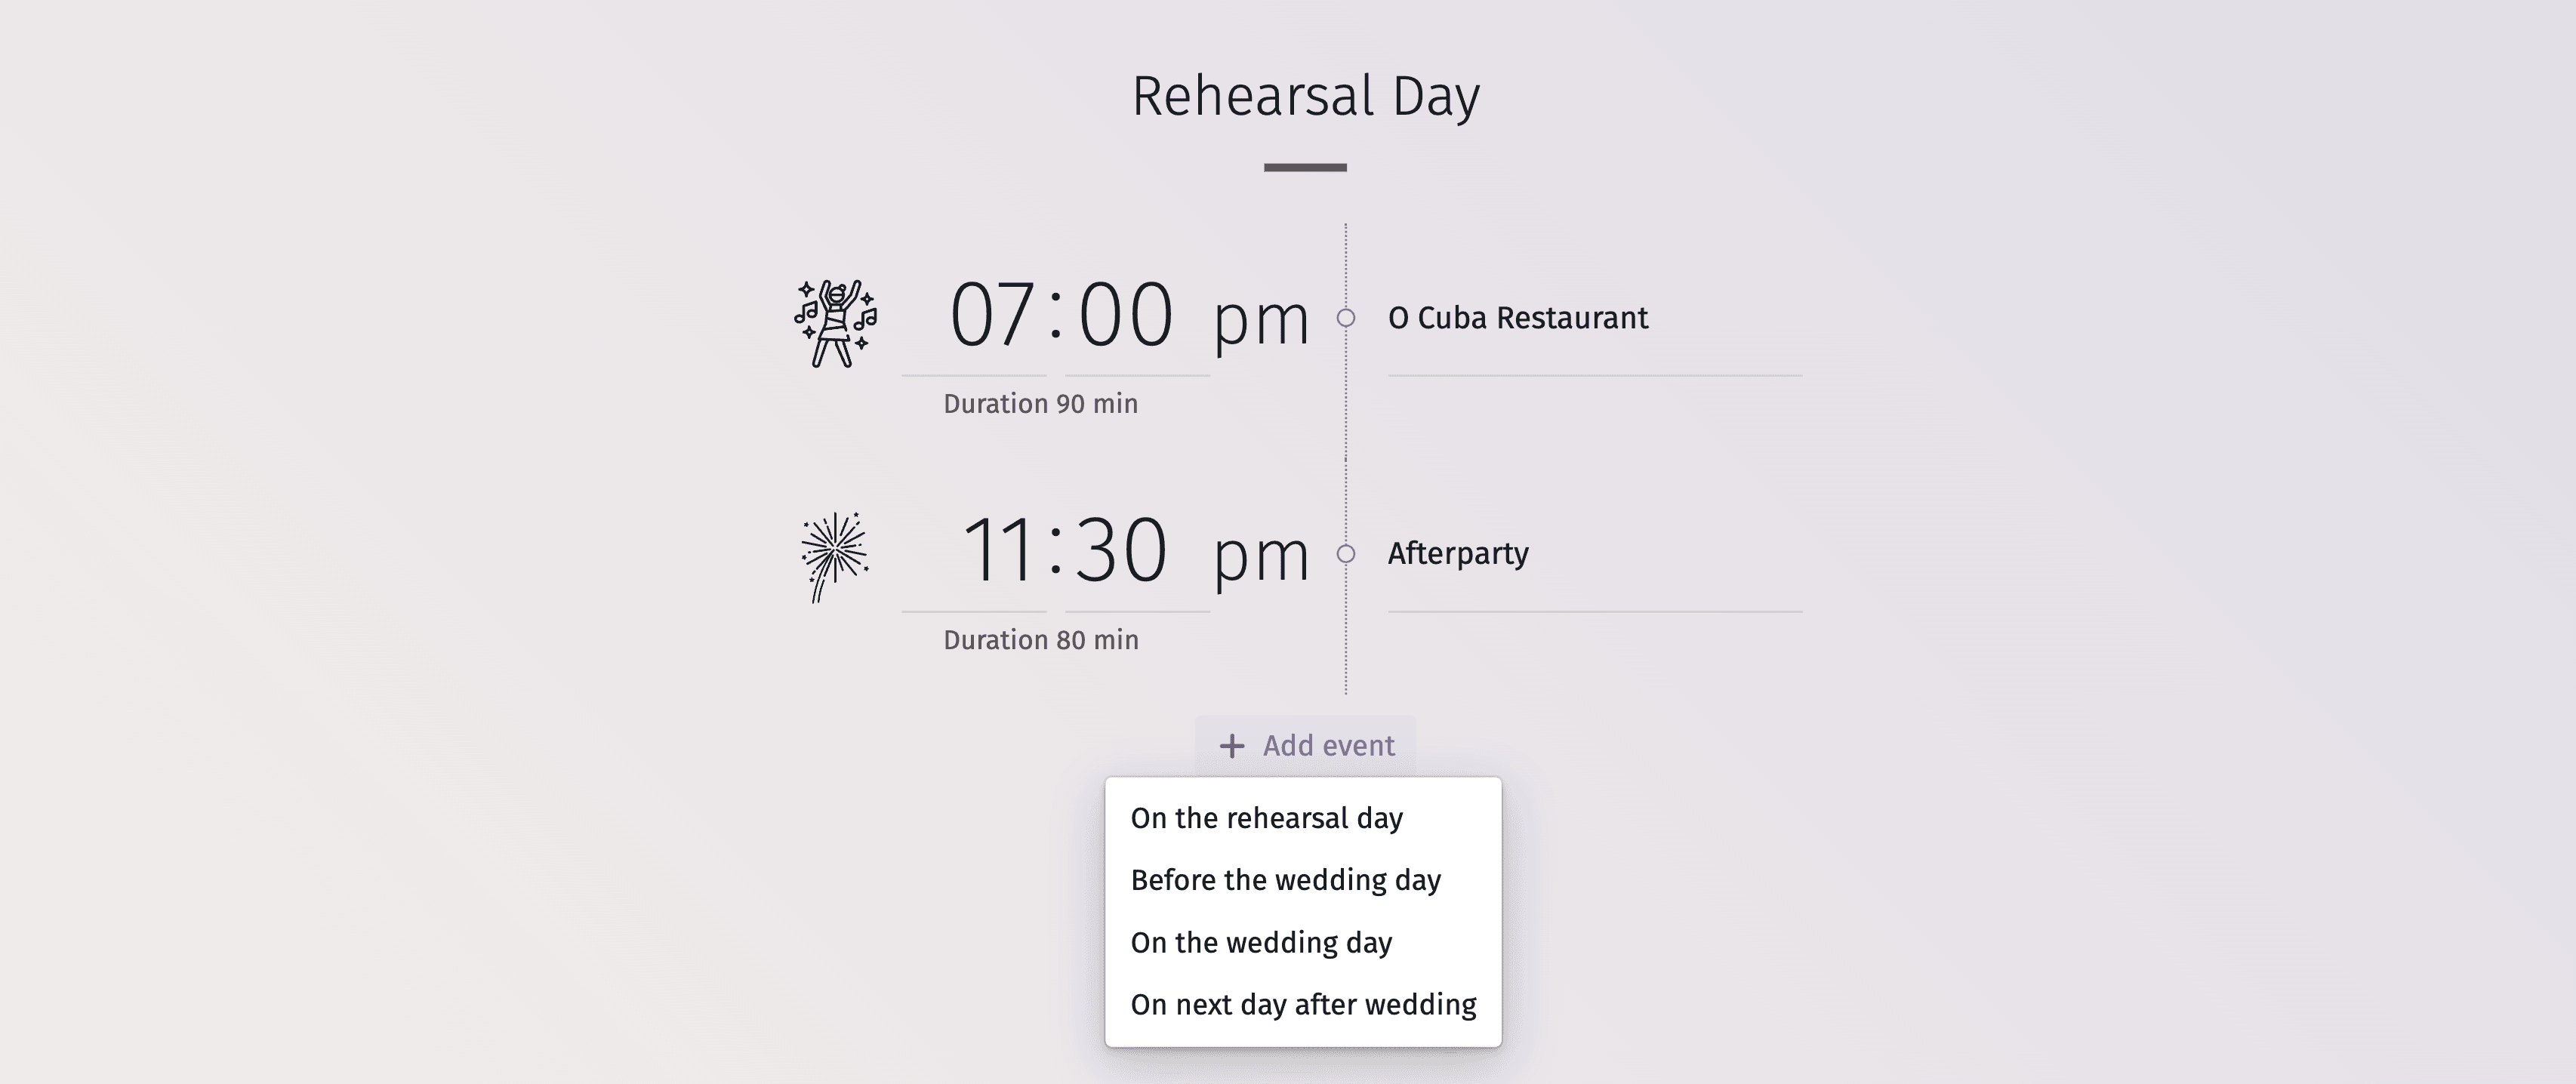 Image depicting a chronological wedding day plan from morning preparations to evening celebrations